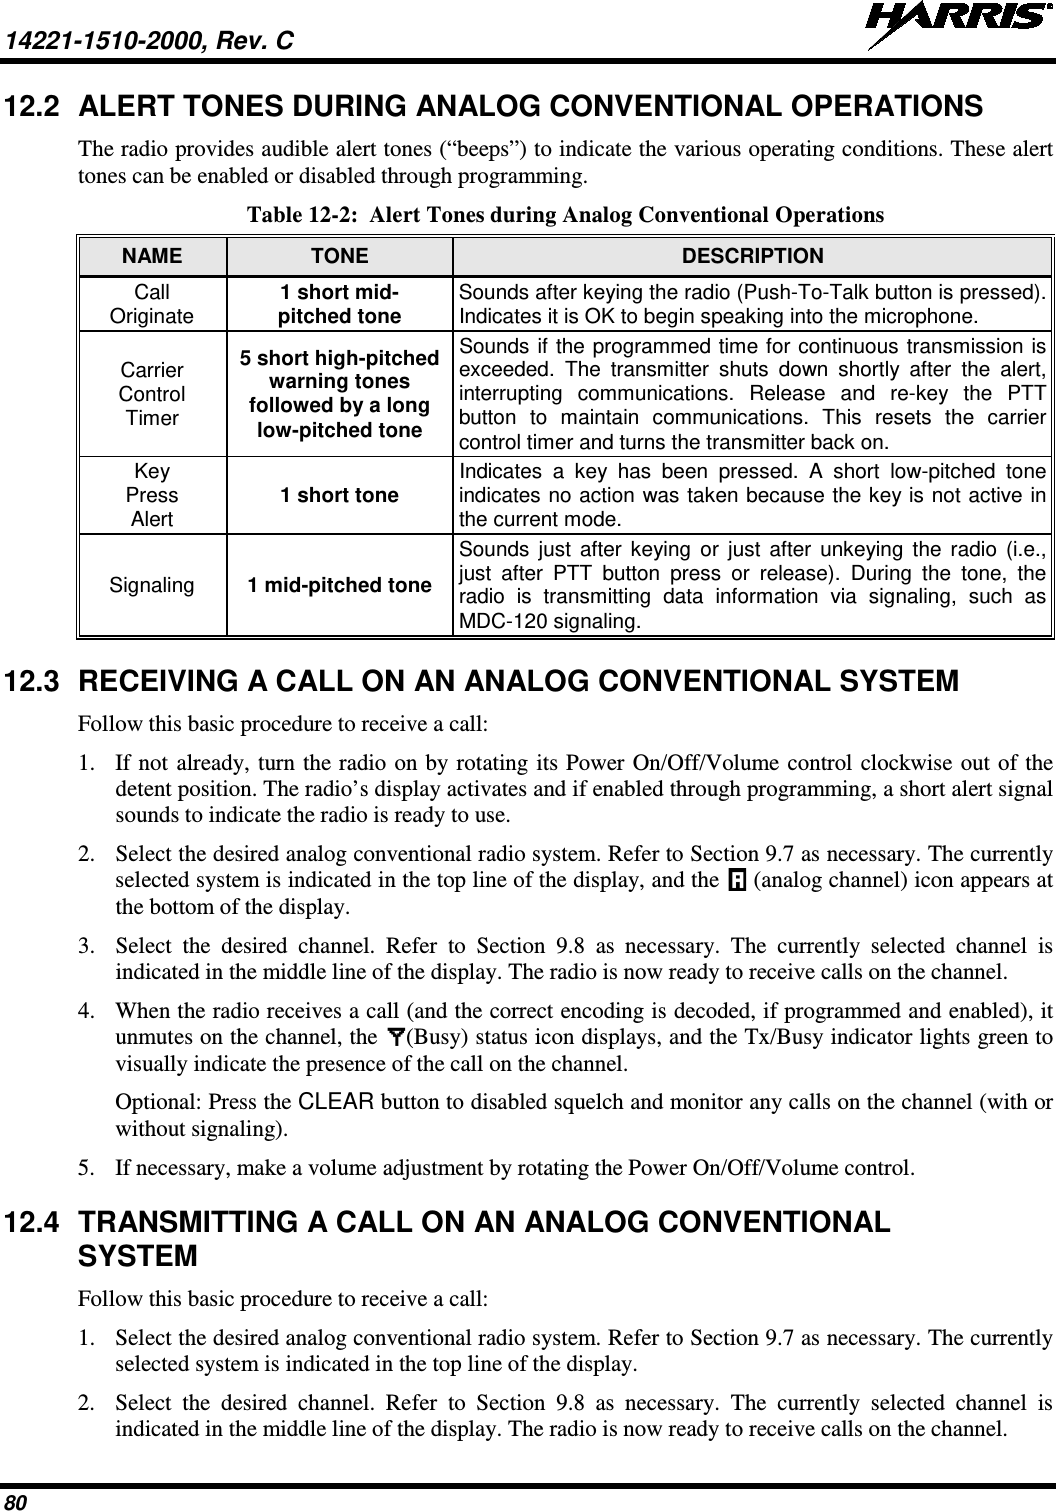 14221-1510-2000, Rev. C   80 12.2 ALERT TONES DURING ANALOG CONVENTIONAL OPERATIONS The radio provides audible alert tones (“beeps”) to indicate the various operating conditions. These alert tones can be enabled or disabled through programming. Table 12-2:  Alert Tones during Analog Conventional Operations  NAME TONE DESCRIPTION Call Originate 1 short mid- pitched tone Sounds after keying the radio (Push-To-Talk button is pressed). Indicates it is OK to begin speaking into the microphone. Carrier Control Timer 5 short high-pitched warning tones followed by a long low-pitched tone Sounds if the programmed time for continuous transmission is exceeded. The transmitter shuts down shortly after the alert, interrupting communications. Release and re-key the PTT button to maintain communications. This resets the carrier control timer and turns the transmitter back on. Key Press Alert 1 short tone Indicates a key has been pressed. A short low-pitched tone indicates no action was taken because the key is not active in the current mode. Signaling 1 mid-pitched tone Sounds just after keying or just after unkeying the radio (i.e., just after PTT button press or release). During the tone, the radio is transmitting data information via signaling, such as MDC-120 signaling. 12.3 RECEIVING A CALL ON AN ANALOG CONVENTIONAL SYSTEM Follow this basic procedure to receive a call: 1. If not already, turn the radio on by rotating its Power On/Off/Volume control clockwise out of the detent position. The radio’s display activates and if enabled through programming, a short alert signal sounds to indicate the radio is ready to use. 2. Select the desired analog conventional radio system. Refer to Section 9.7 as necessary. The currently selected system is indicated in the top line of the display, and the   (analog channel) icon appears at the bottom of the display. 3. Select the desired channel. Refer to Section 9.8  as necessary. The currently selected channel is indicated in the middle line of the display. The radio is now ready to receive calls on the channel. 4. When the radio receives a call (and the correct encoding is decoded, if programmed and enabled), it unmutes on the channel, the  (Busy) status icon displays, and the Tx/Busy indicator lights green to visually indicate the presence of the call on the channel. Optional: Press the CLEAR button to disabled squelch and monitor any calls on the channel (with or without signaling). 5. If necessary, make a volume adjustment by rotating the Power On/Off/Volume control. 12.4 TRANSMITTING A CALL ON AN ANALOG CONVENTIONAL SYSTEM Follow this basic procedure to receive a call: 1. Select the desired analog conventional radio system. Refer to Section 9.7 as necessary. The currently selected system is indicated in the top line of the display. 2. Select the desired channel. Refer to Section 9.8  as necessary. The currently selected channel is indicated in the middle line of the display. The radio is now ready to receive calls on the channel. 